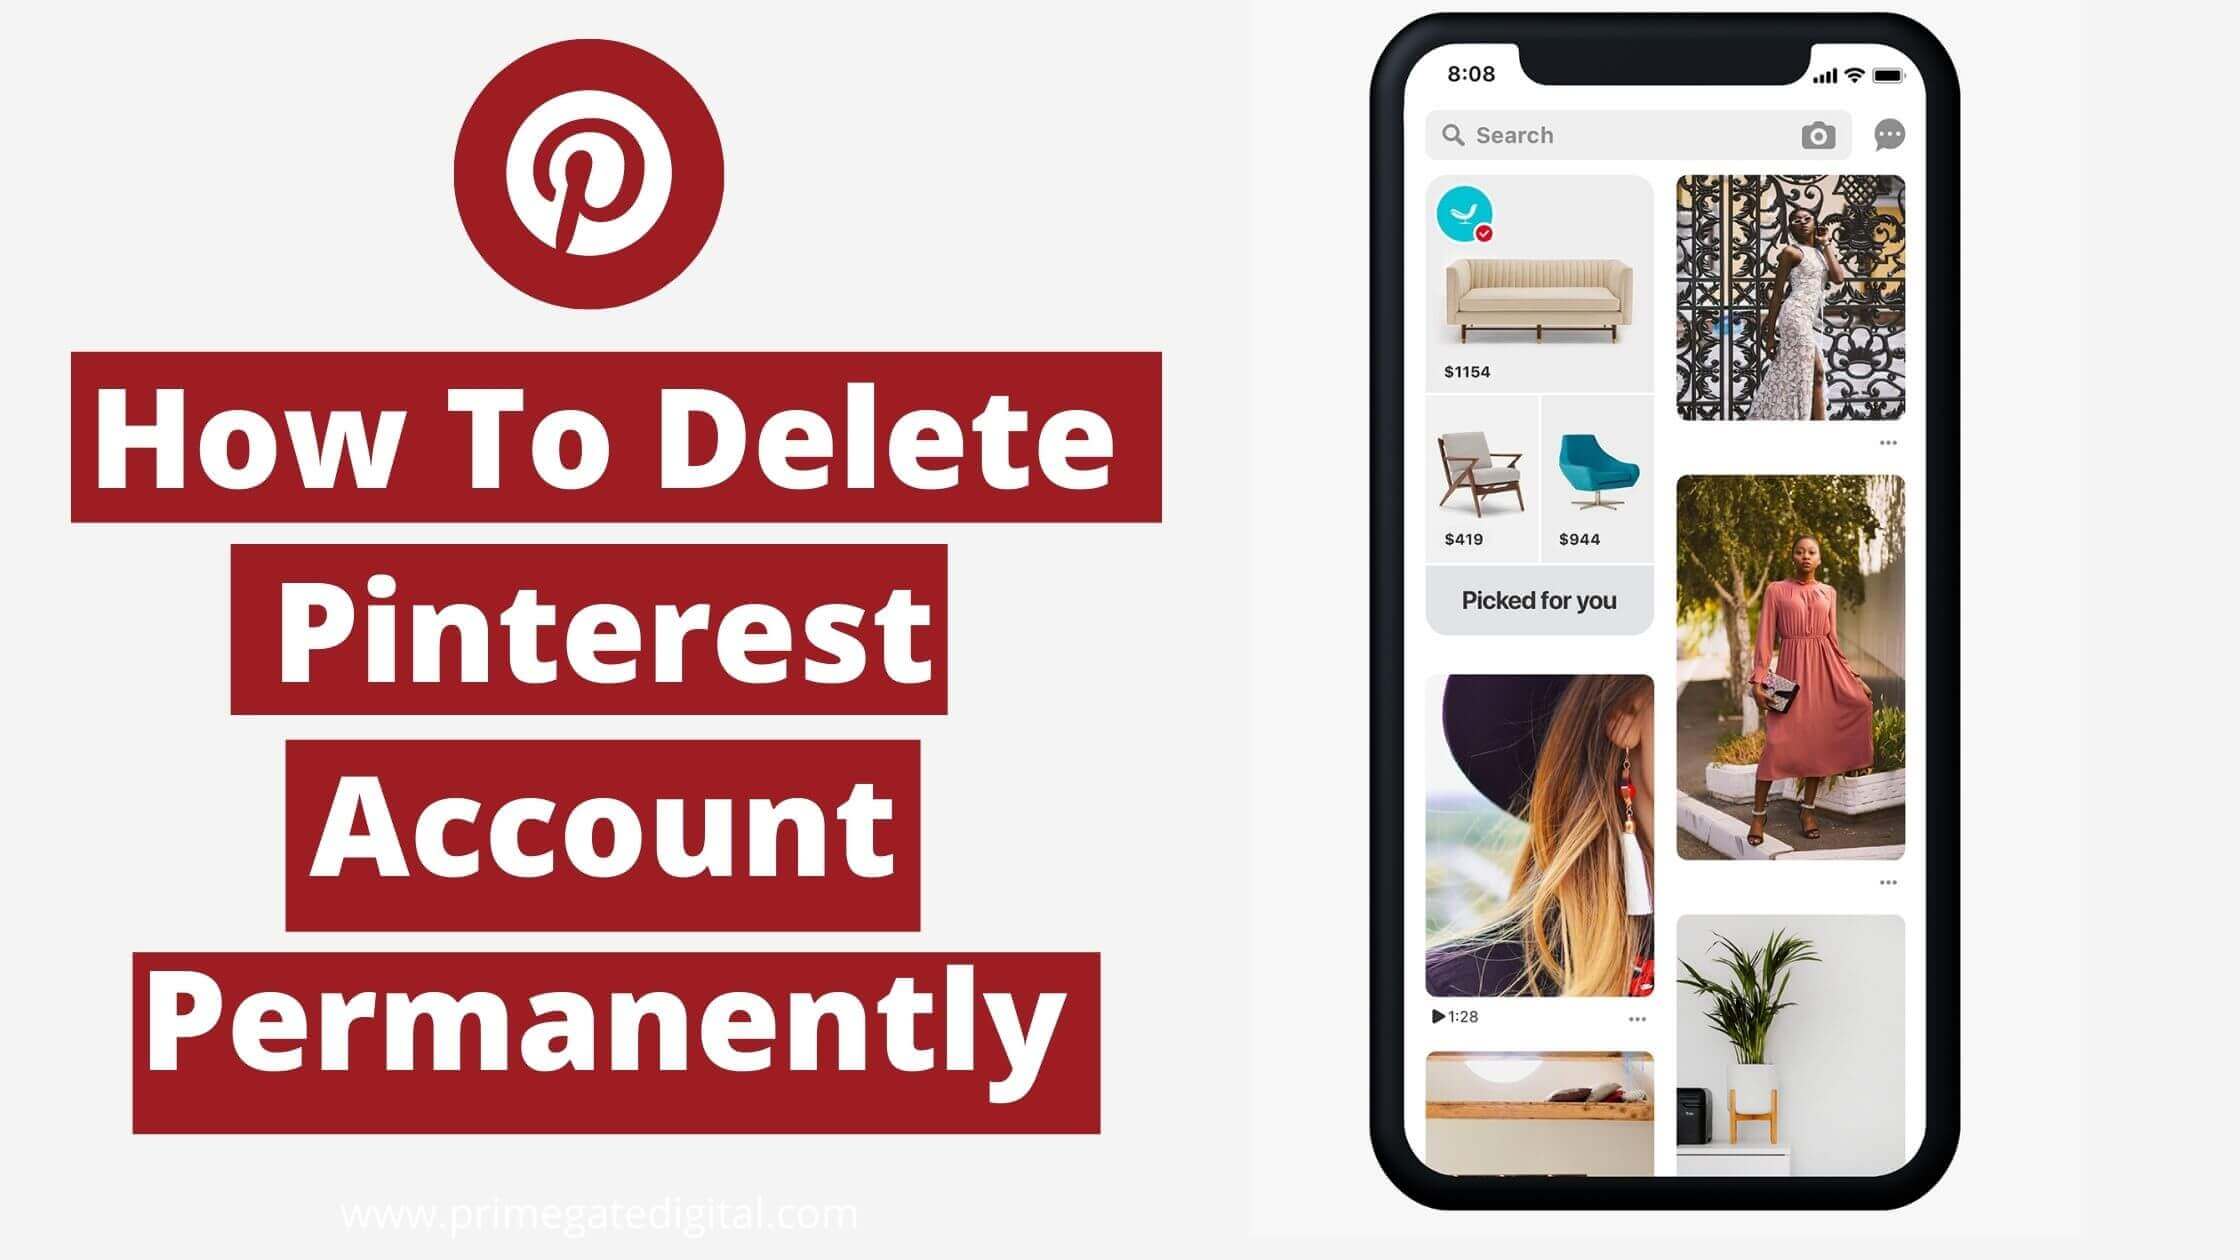 How To Delete Pinterest Account Permanently